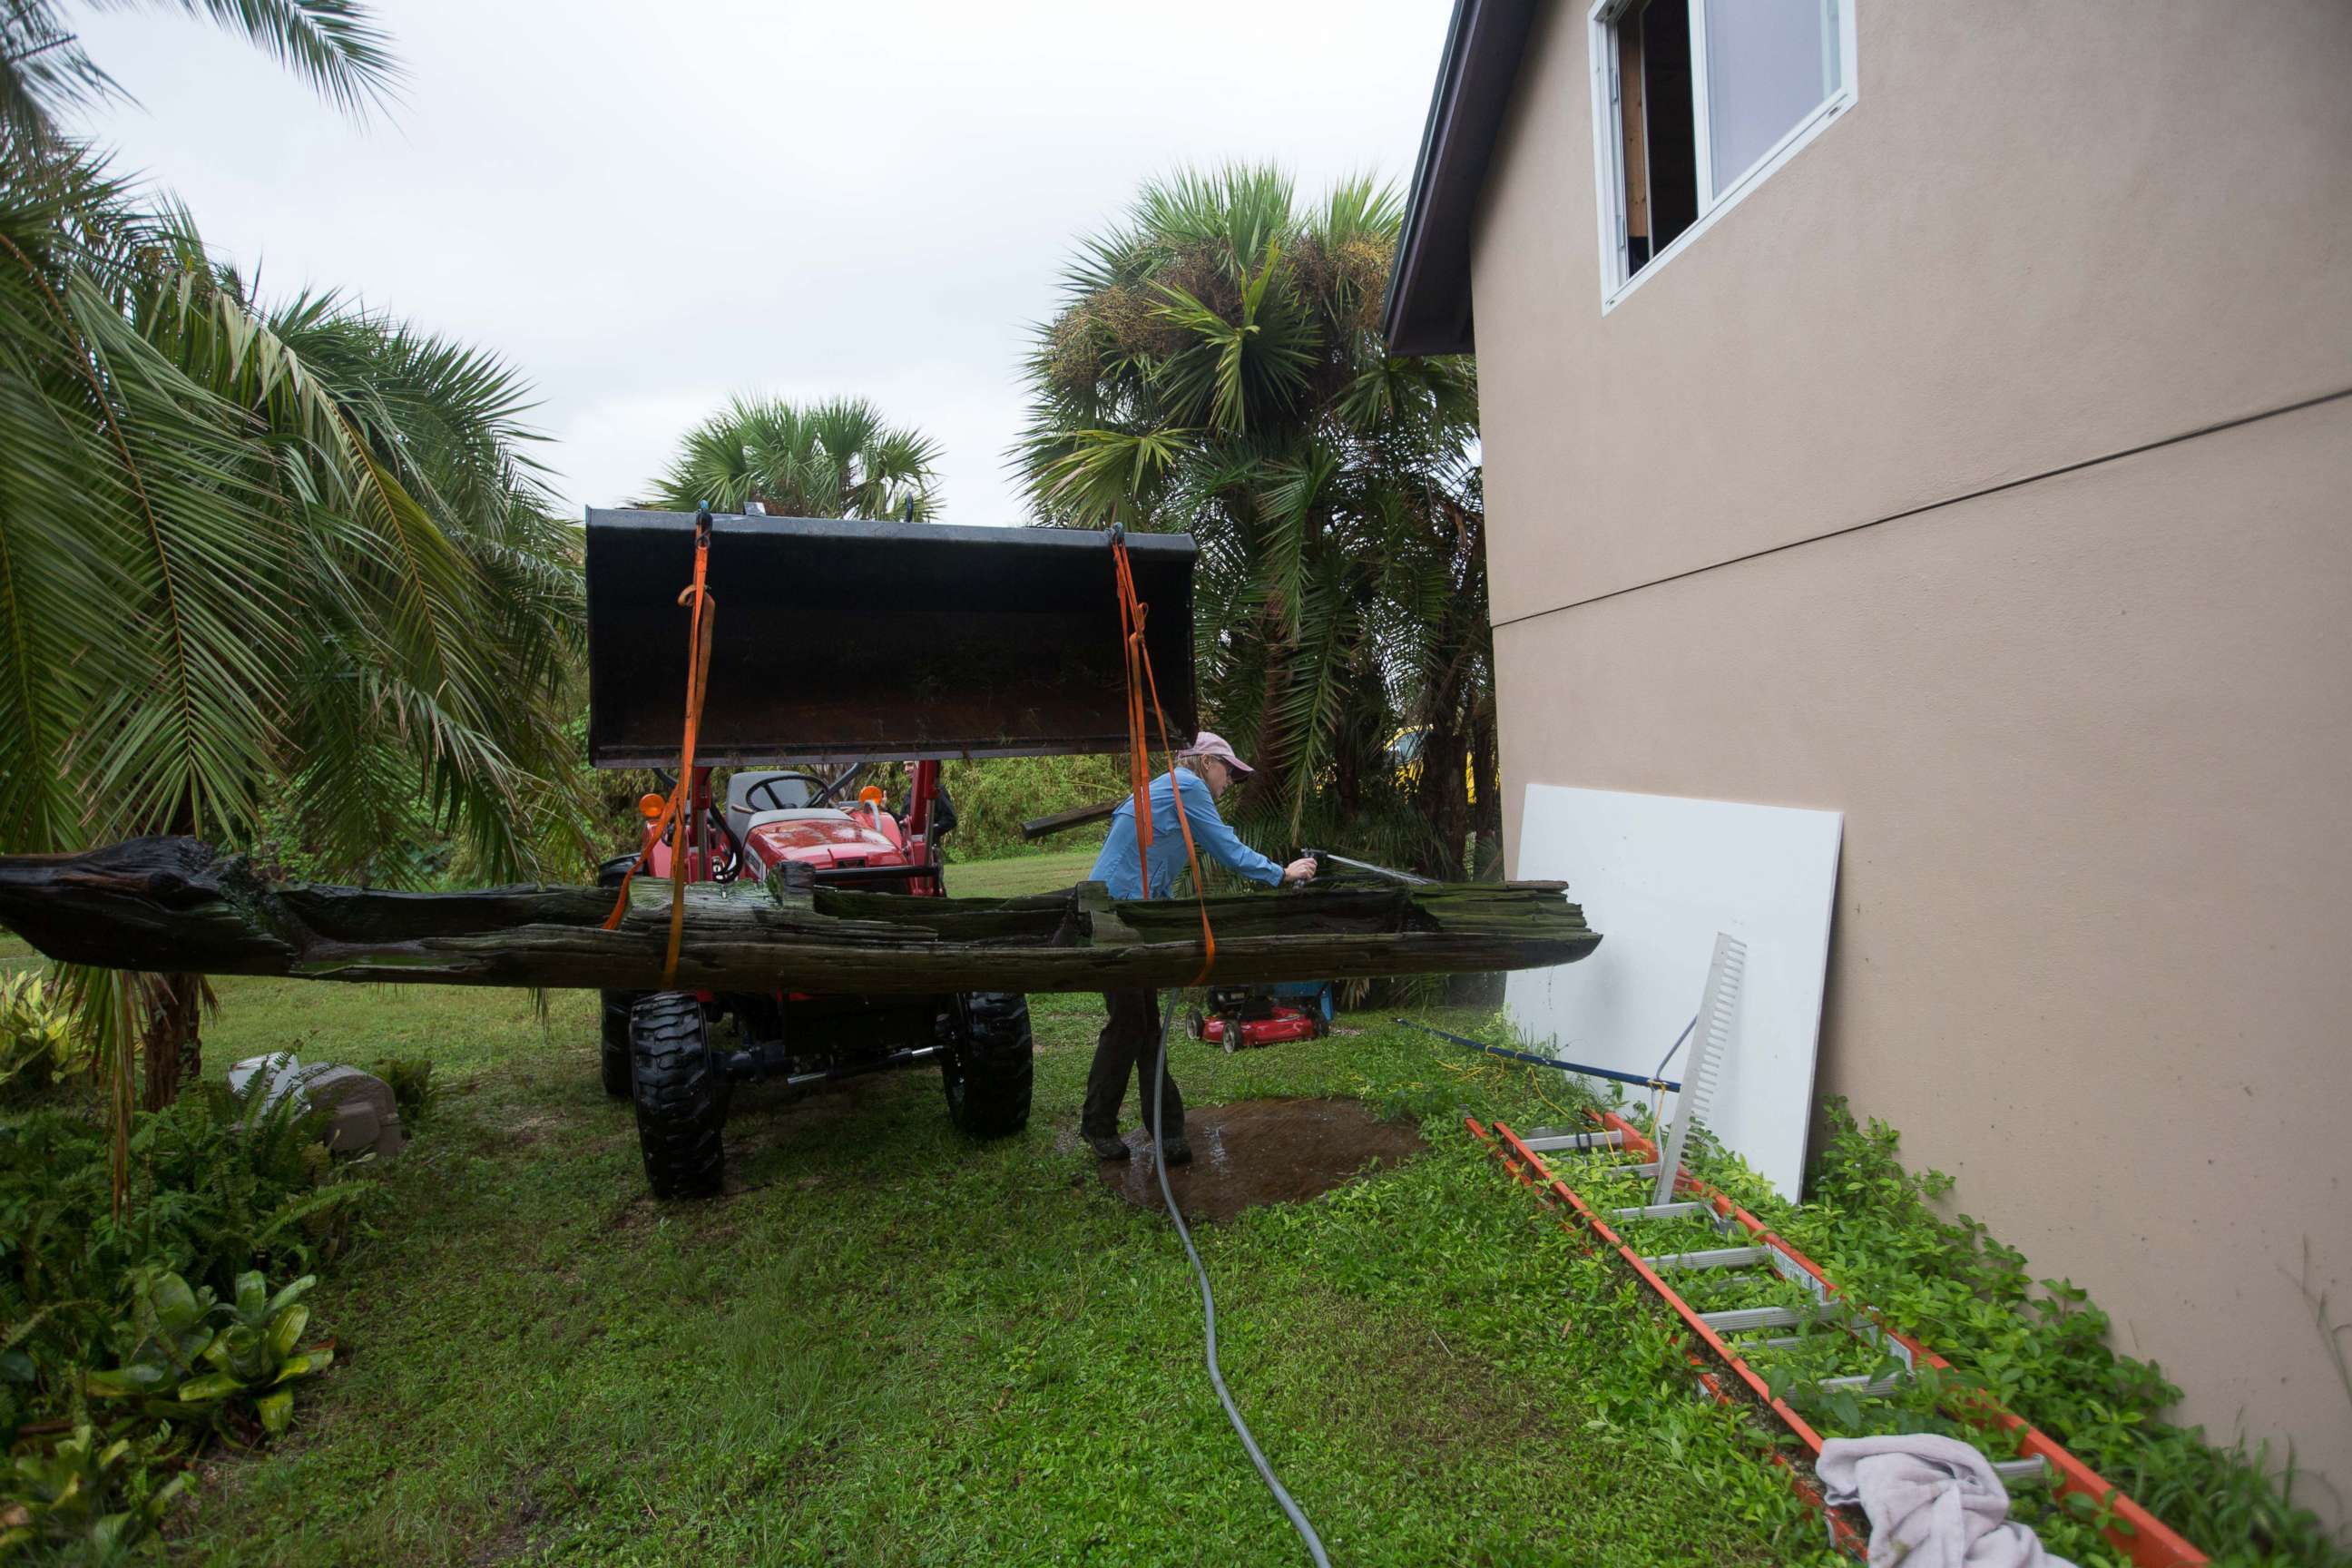 PHOTO: The radiocarbon dating results for the canoe unearthed by Hurricane Irma returned a 50 percent probability the wood is from 1640 to 1680 A.D.